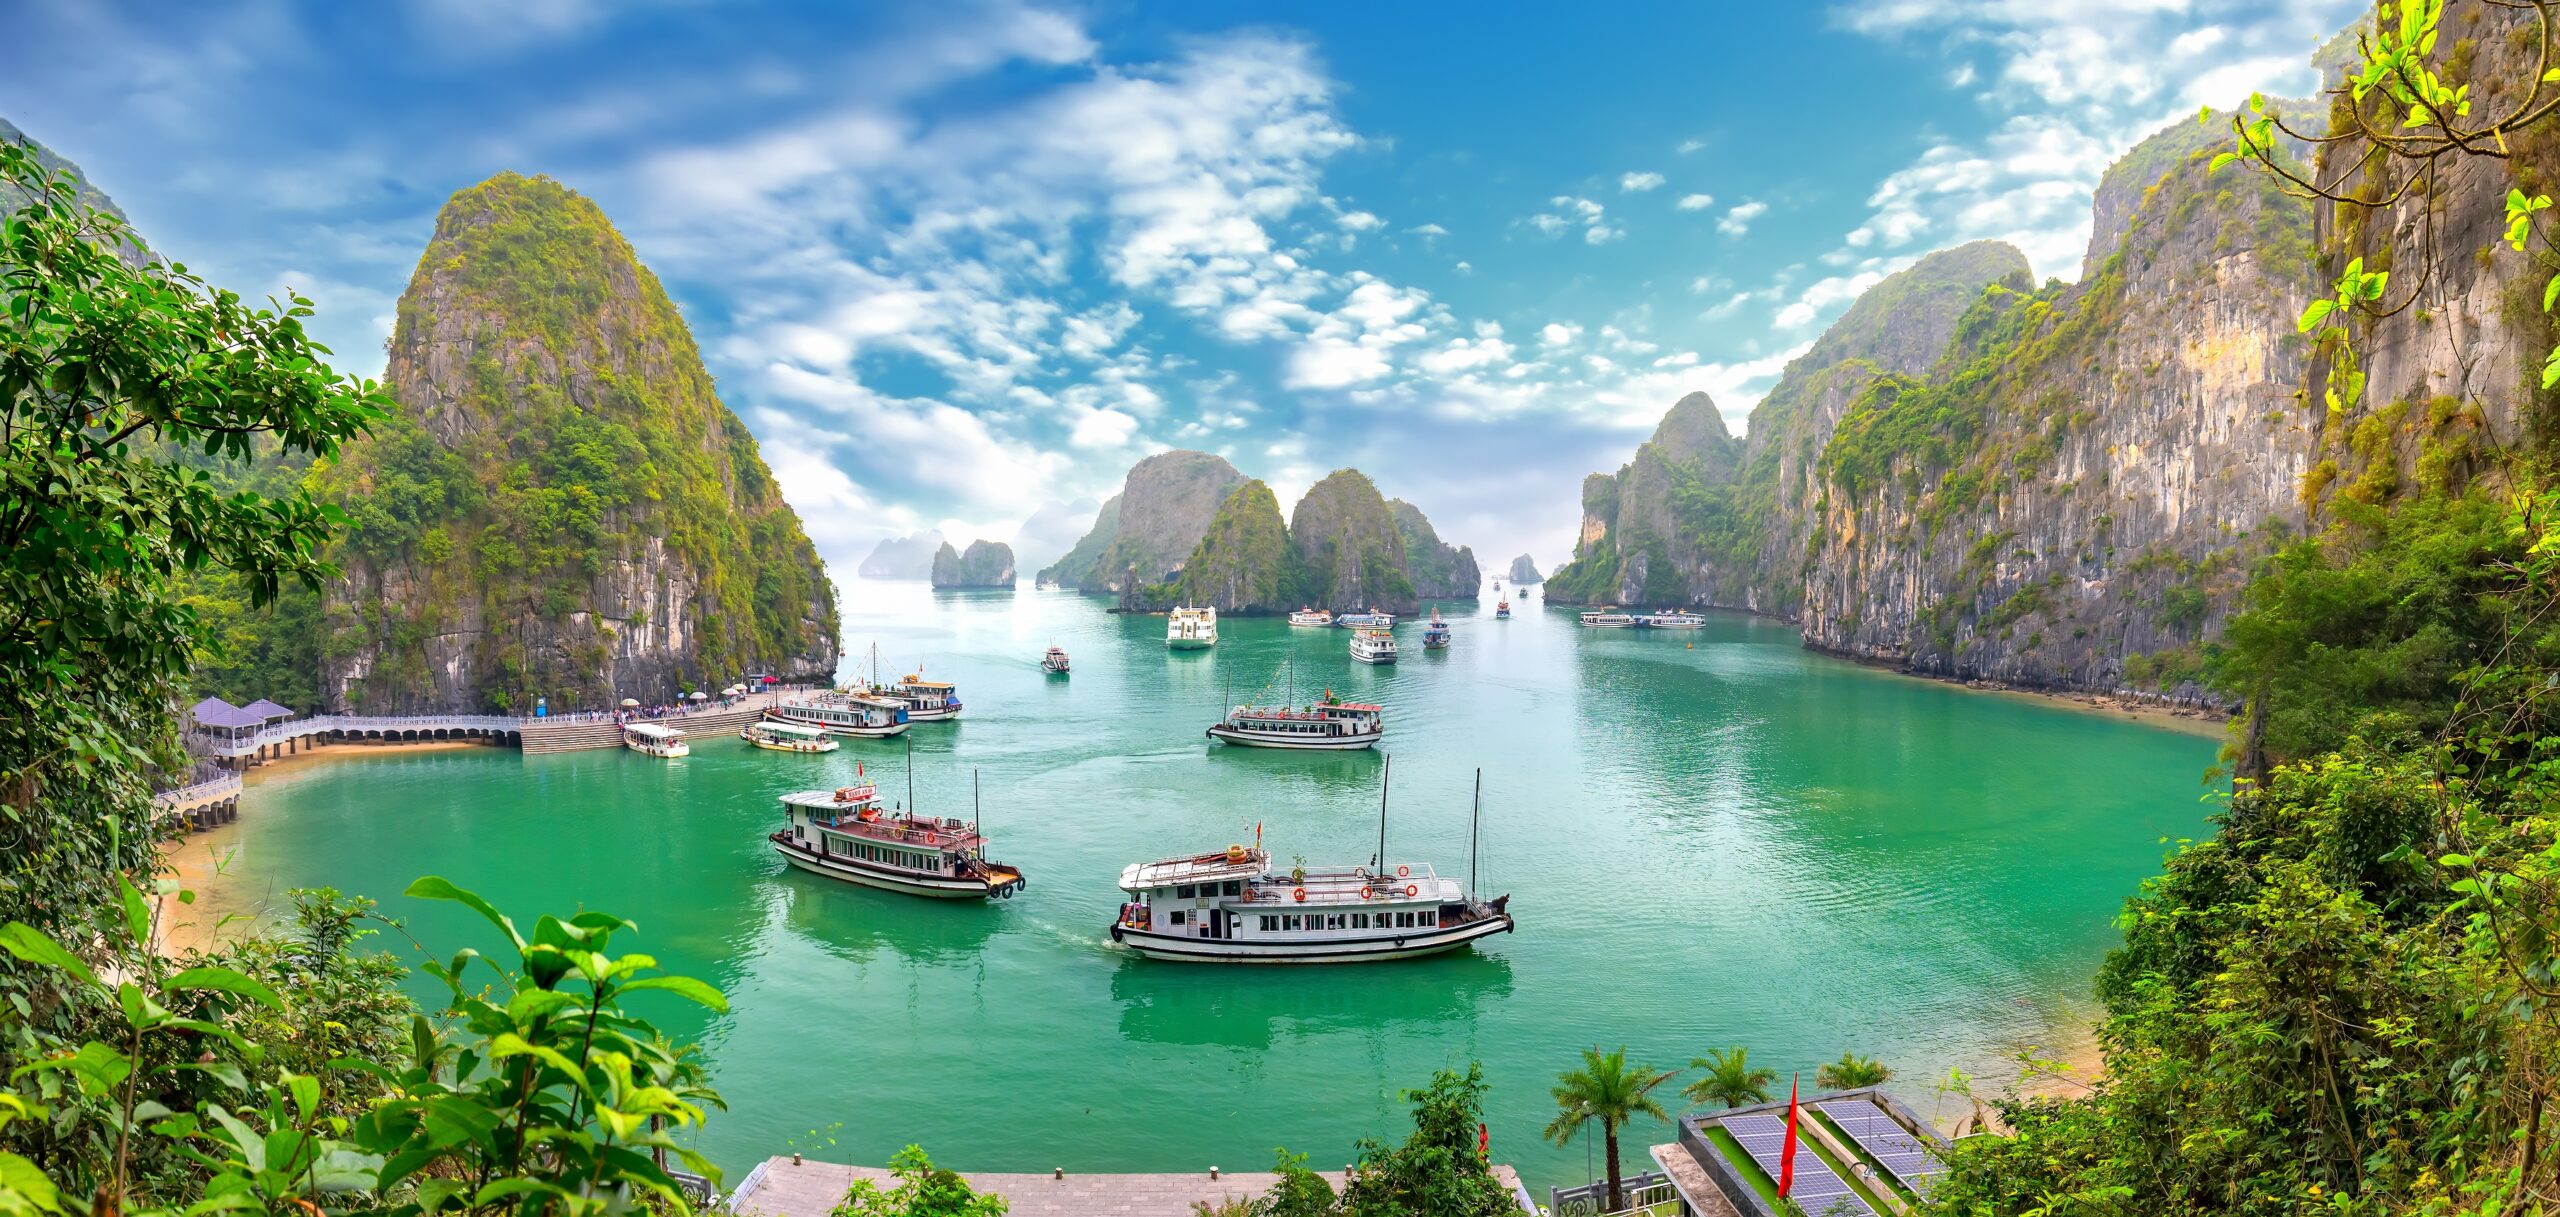 Top 10 Tourist Attractions in Vietnam, Halong Bay